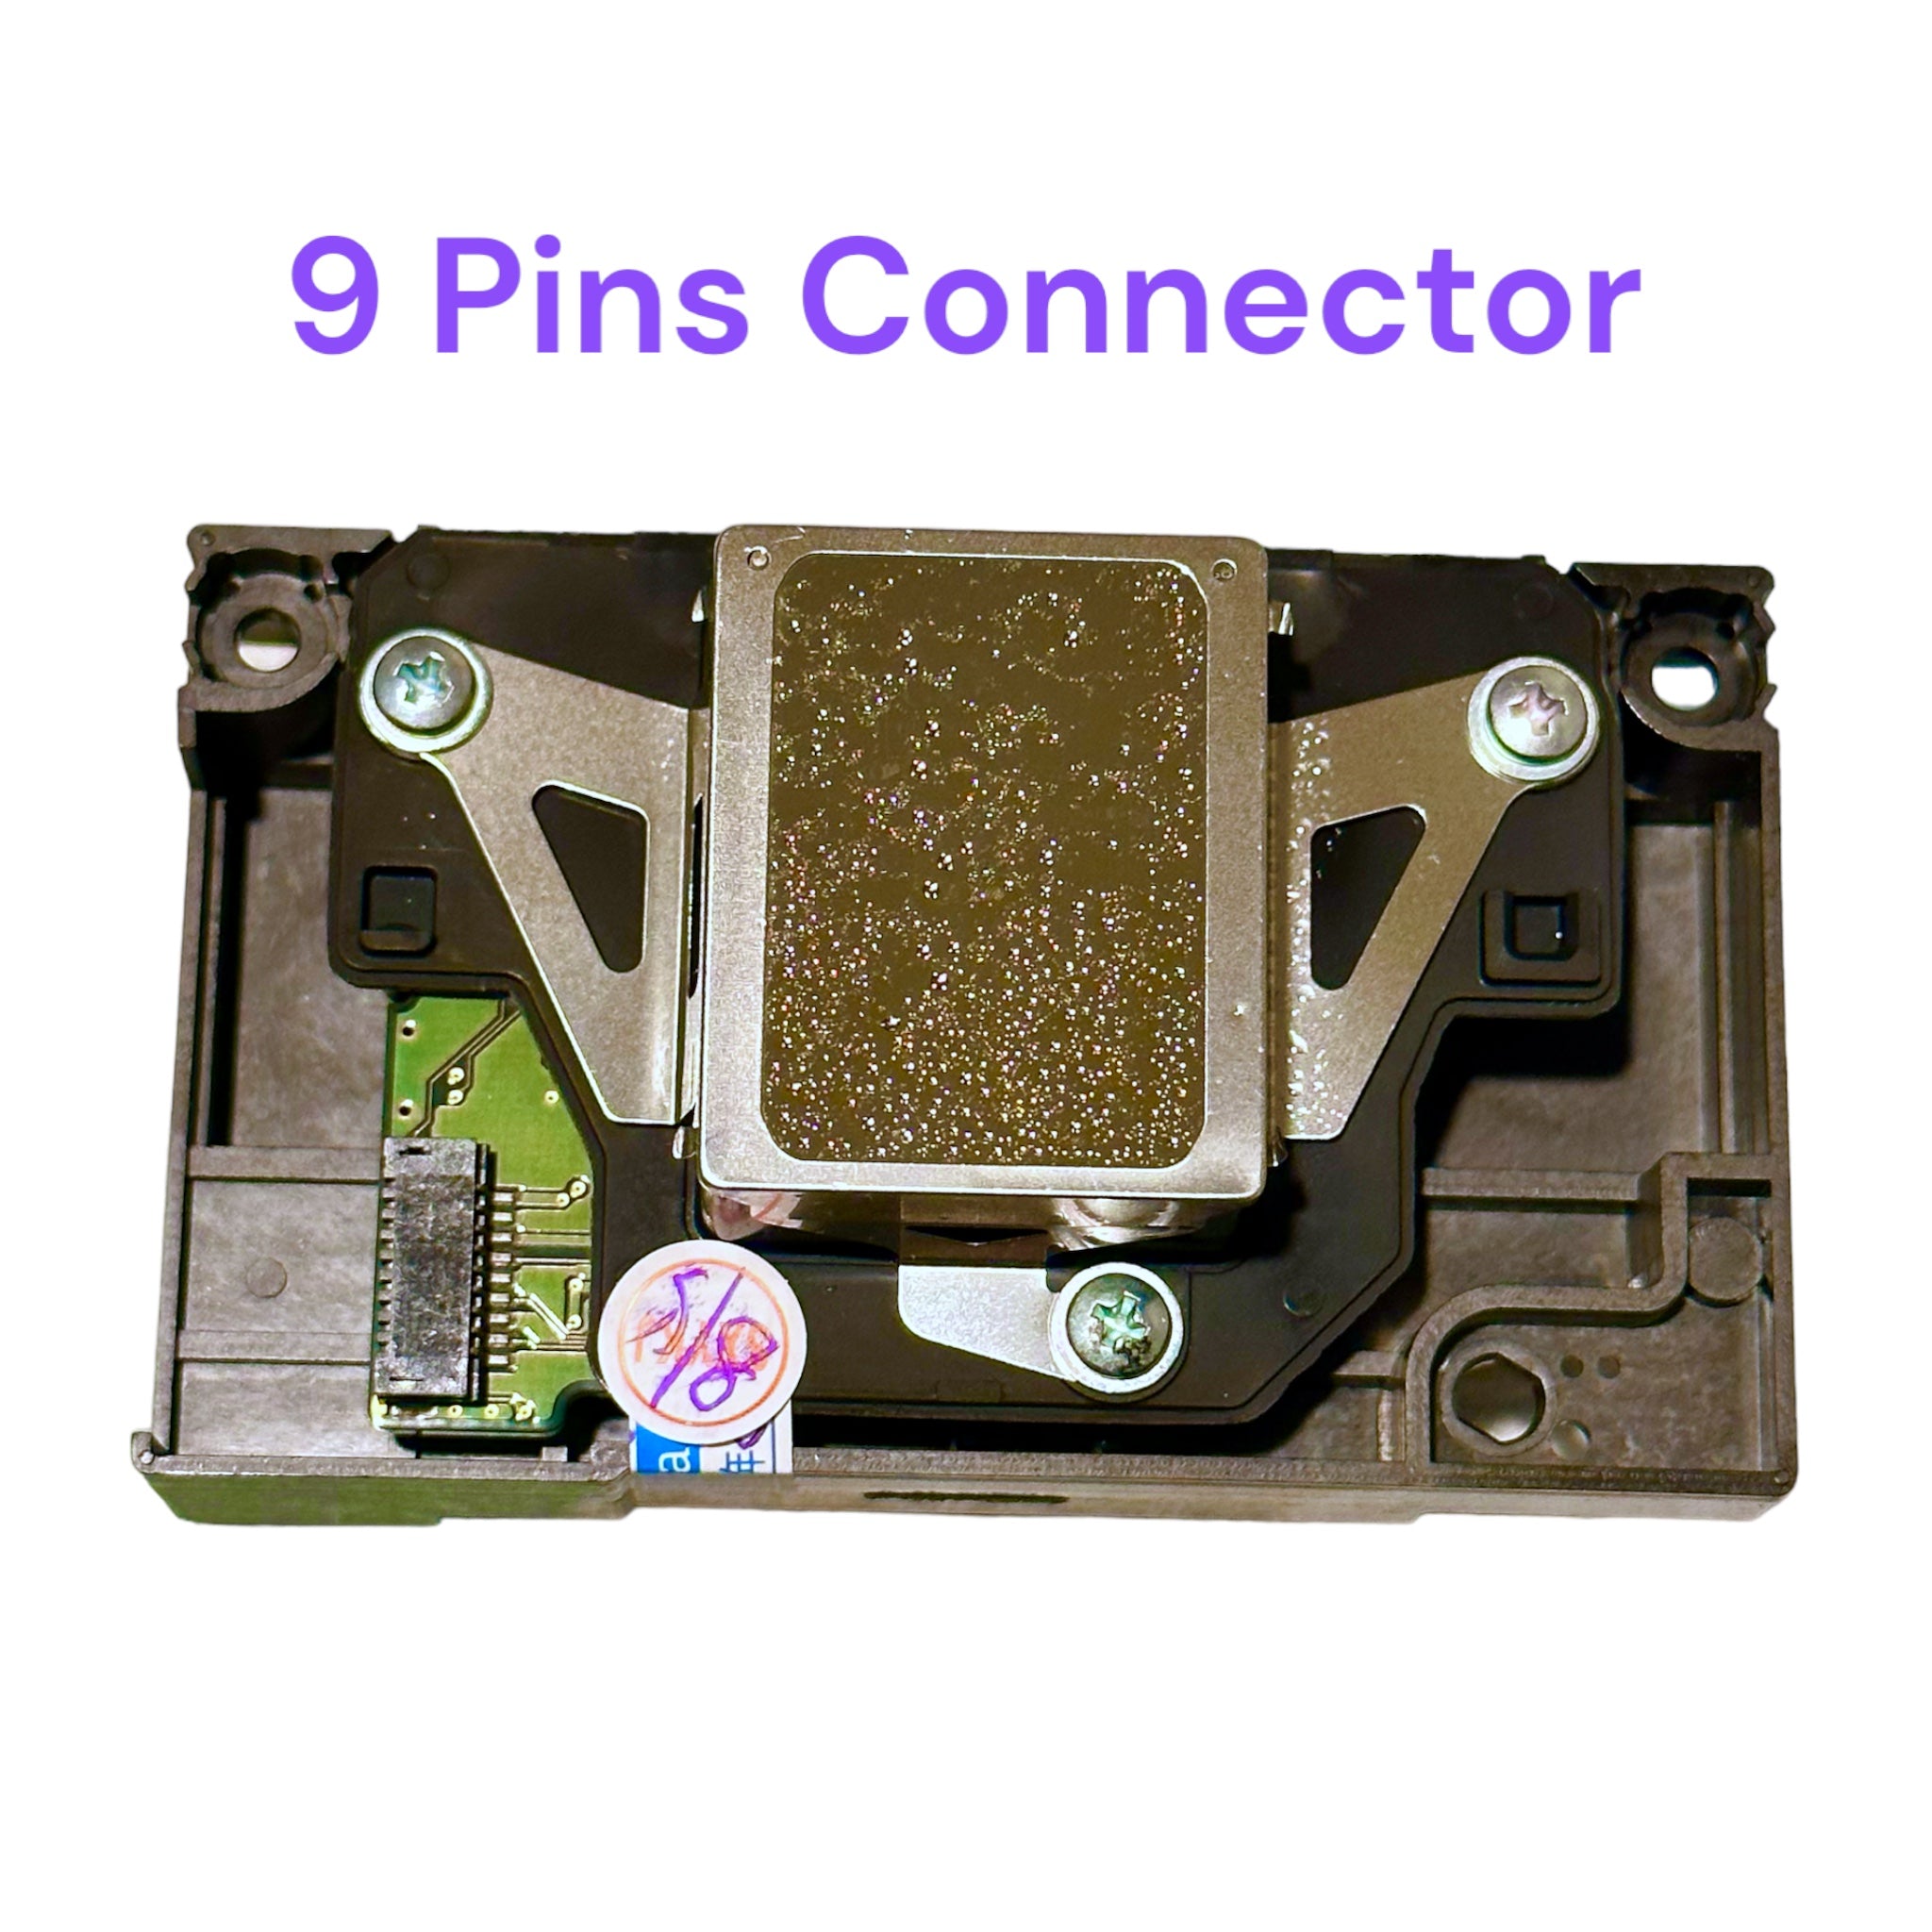 Epson L1800 / 1390 Printhead with GREEN BOARD (Recycled) - 9 Pins Connector